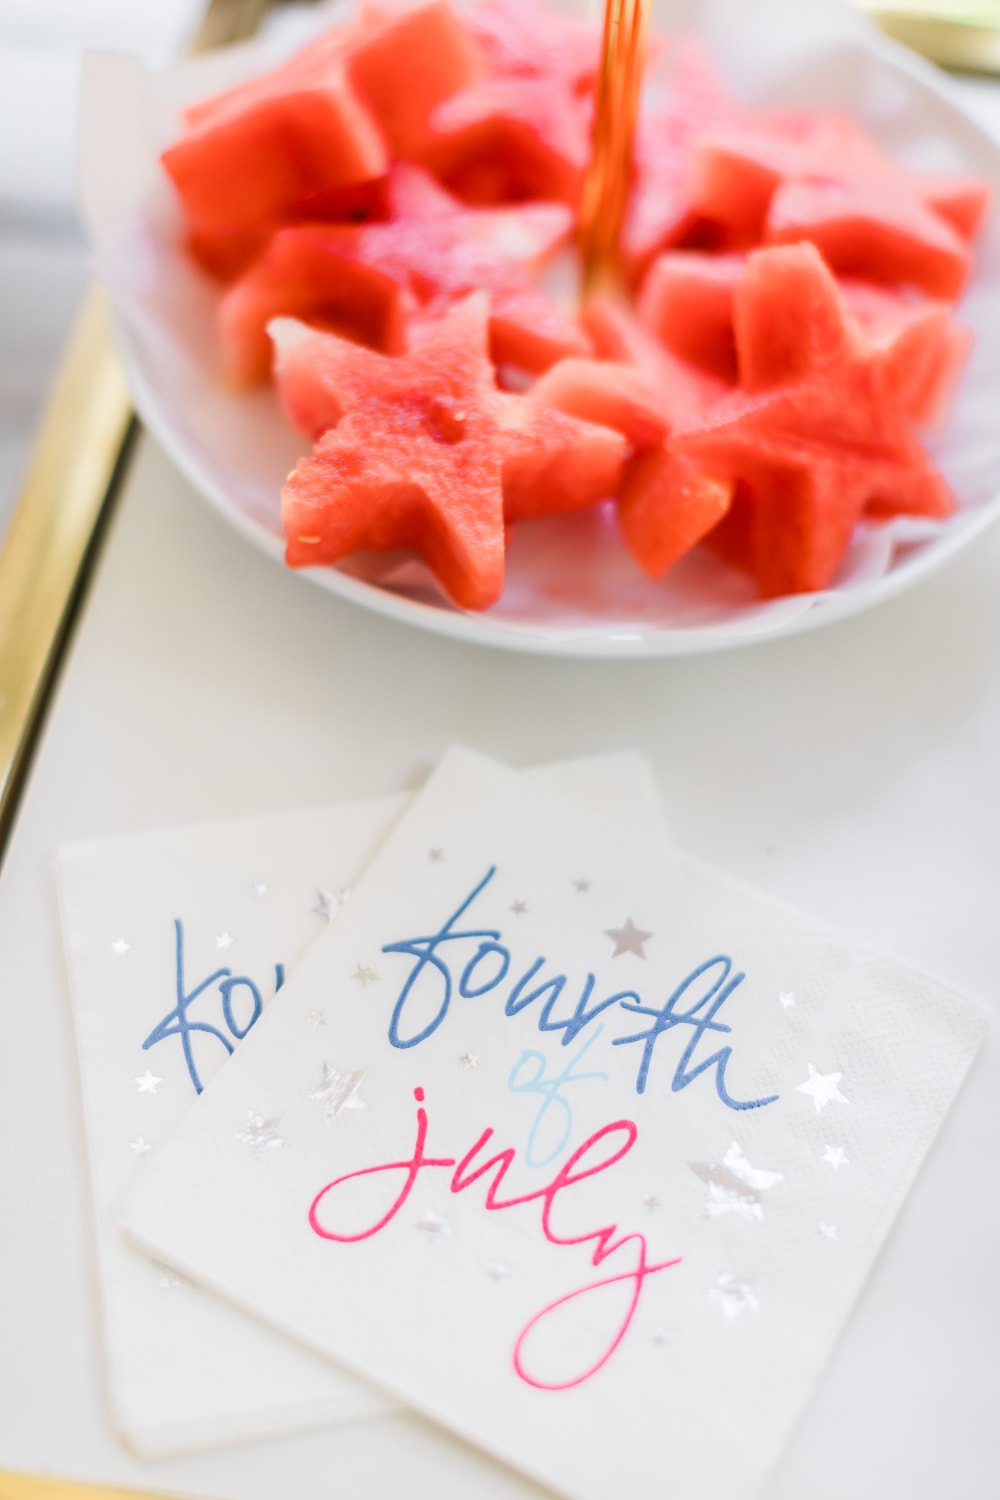 Watermelon stars cut with a star-shaped cookie cutter by blogger Stephanie Ziajka on Diary of a Debutante